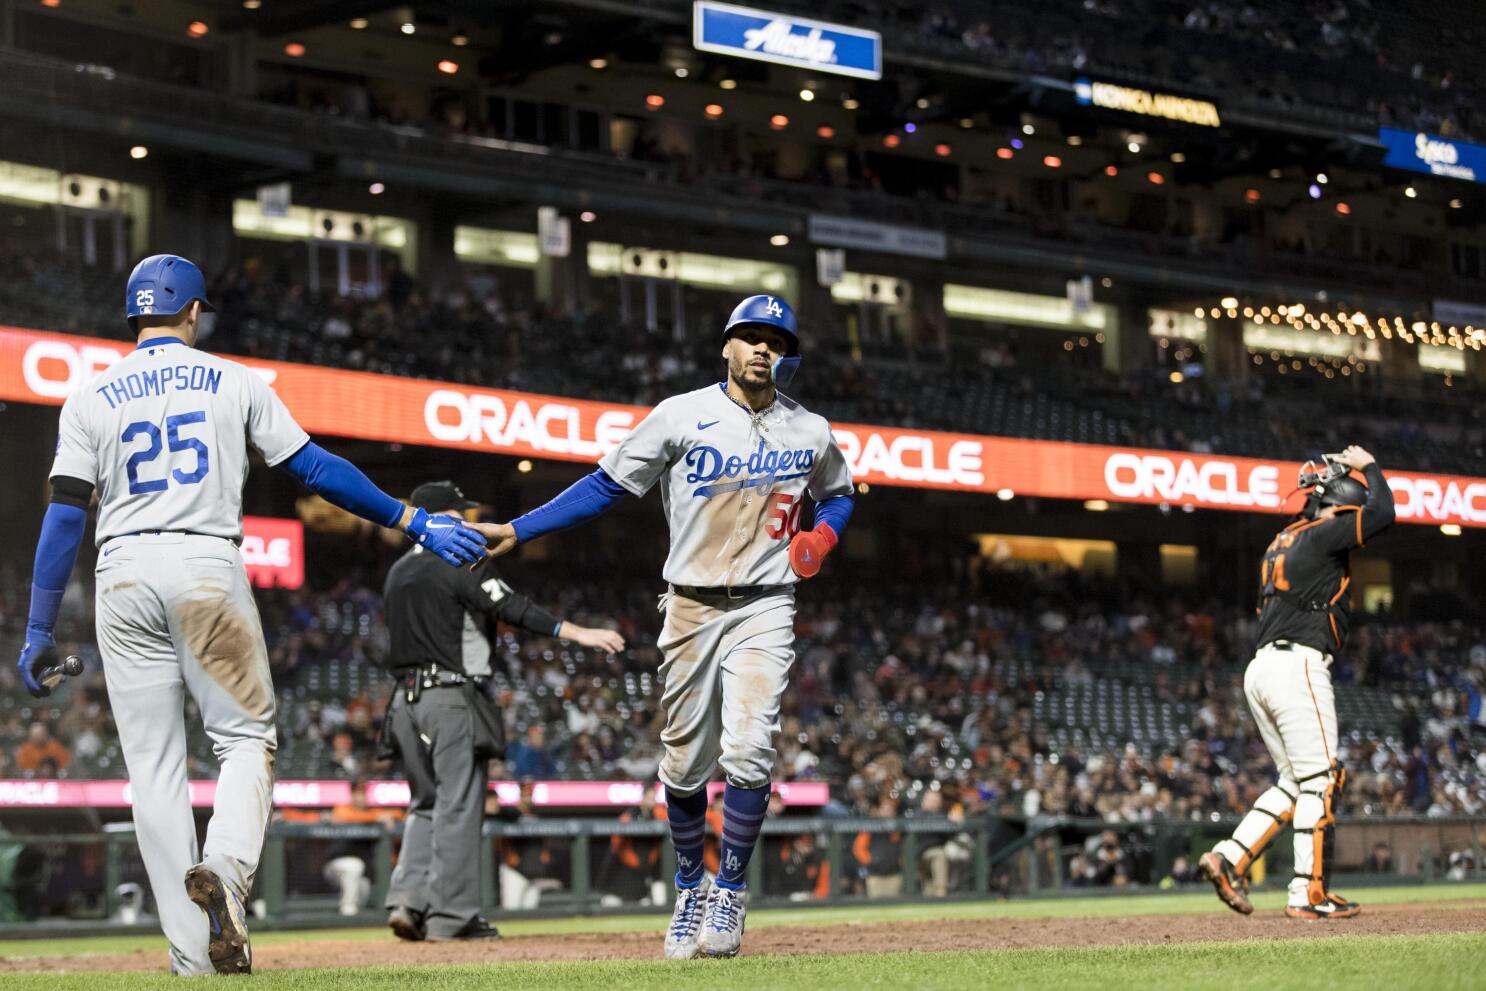 Dodgers, Giants are ready to take rivalry to another level in the